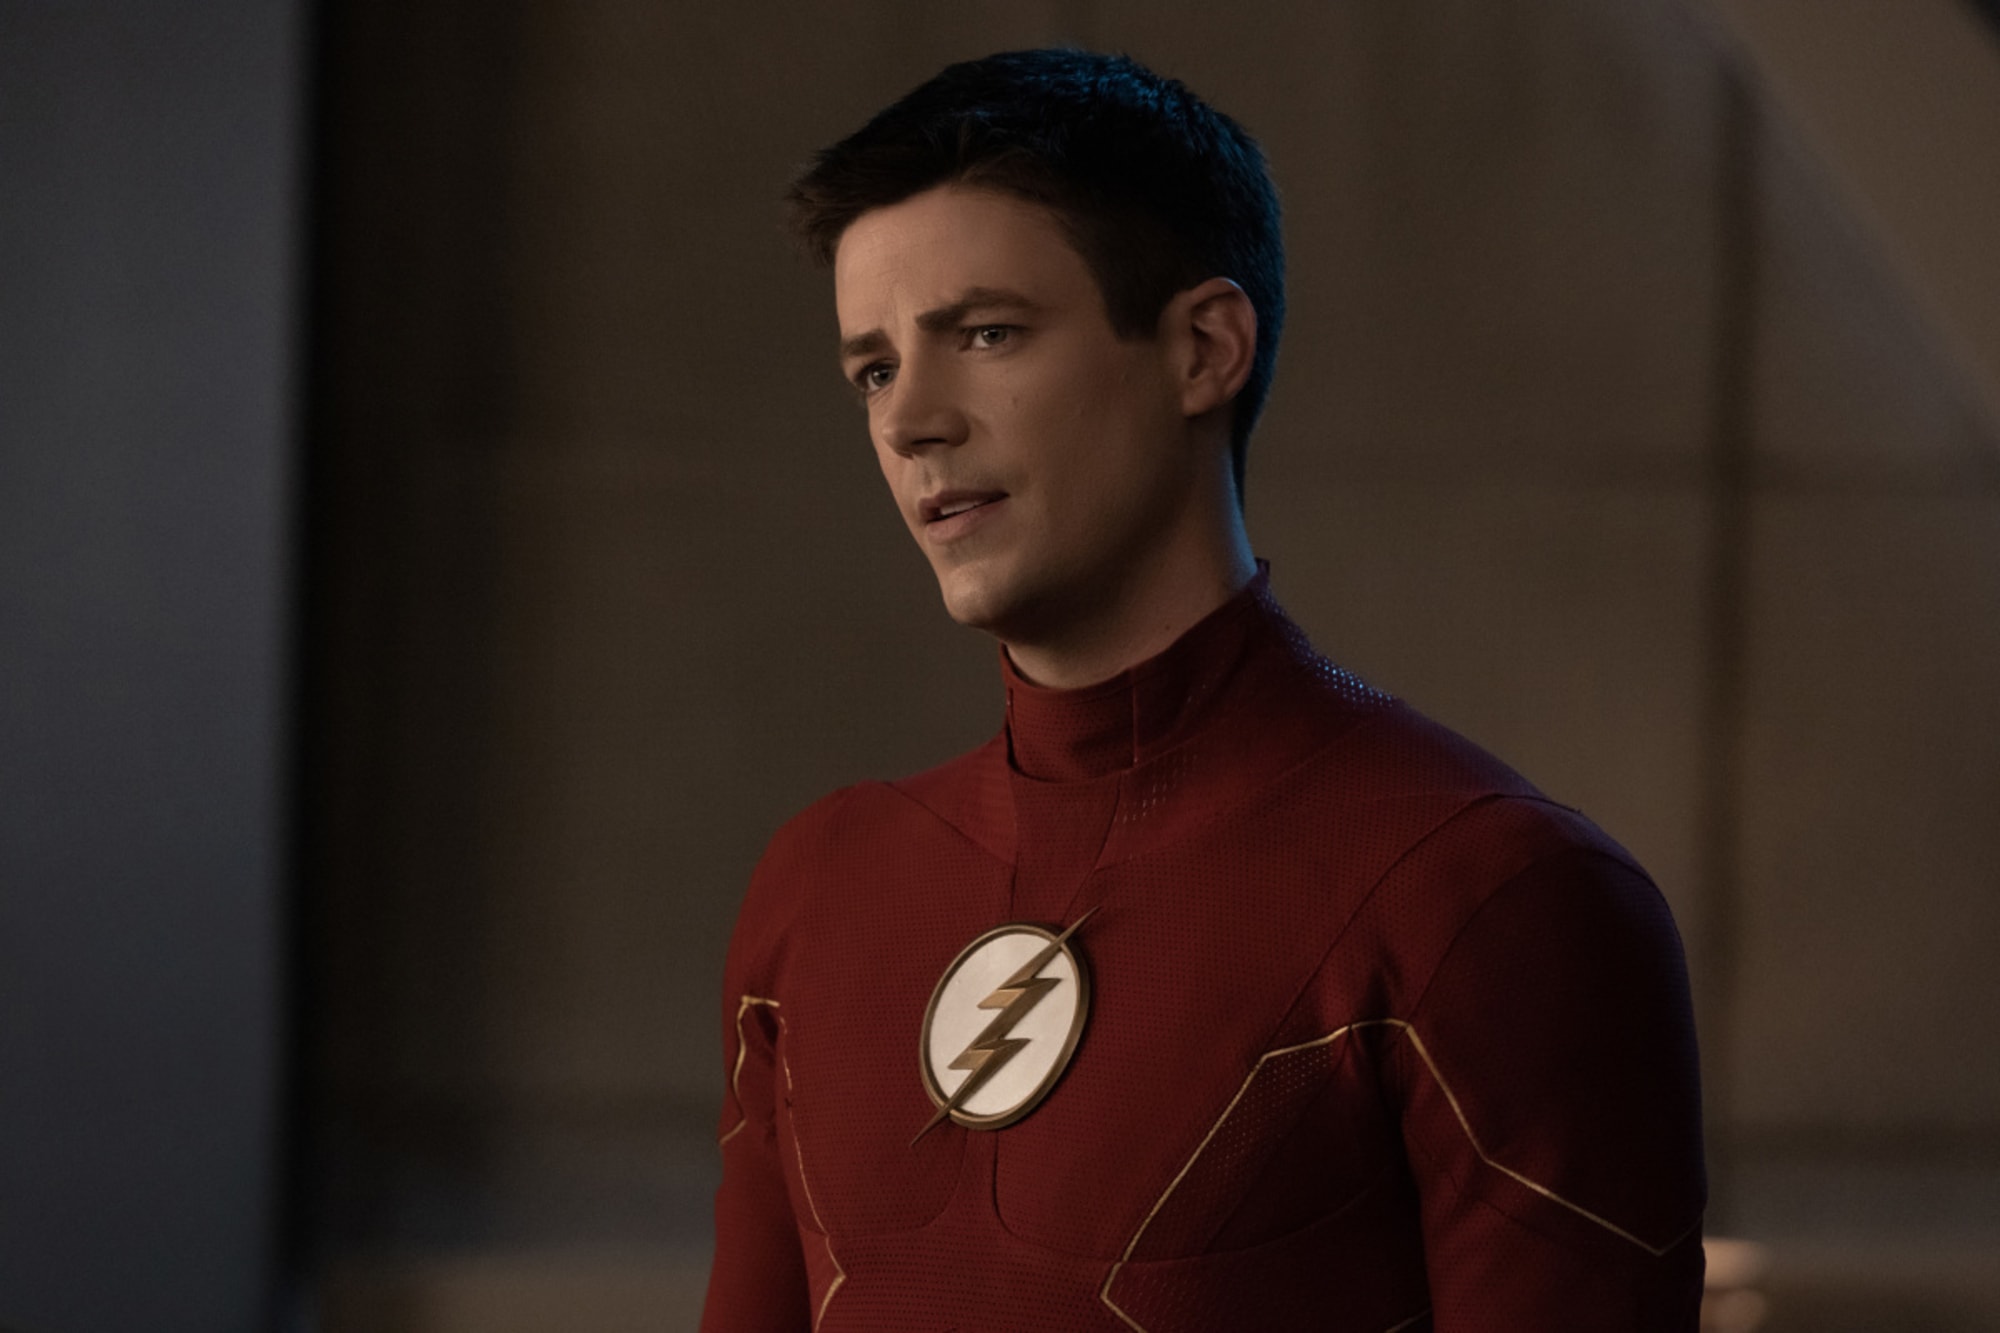 Grant Gustin Shares His Farewell To The Flash